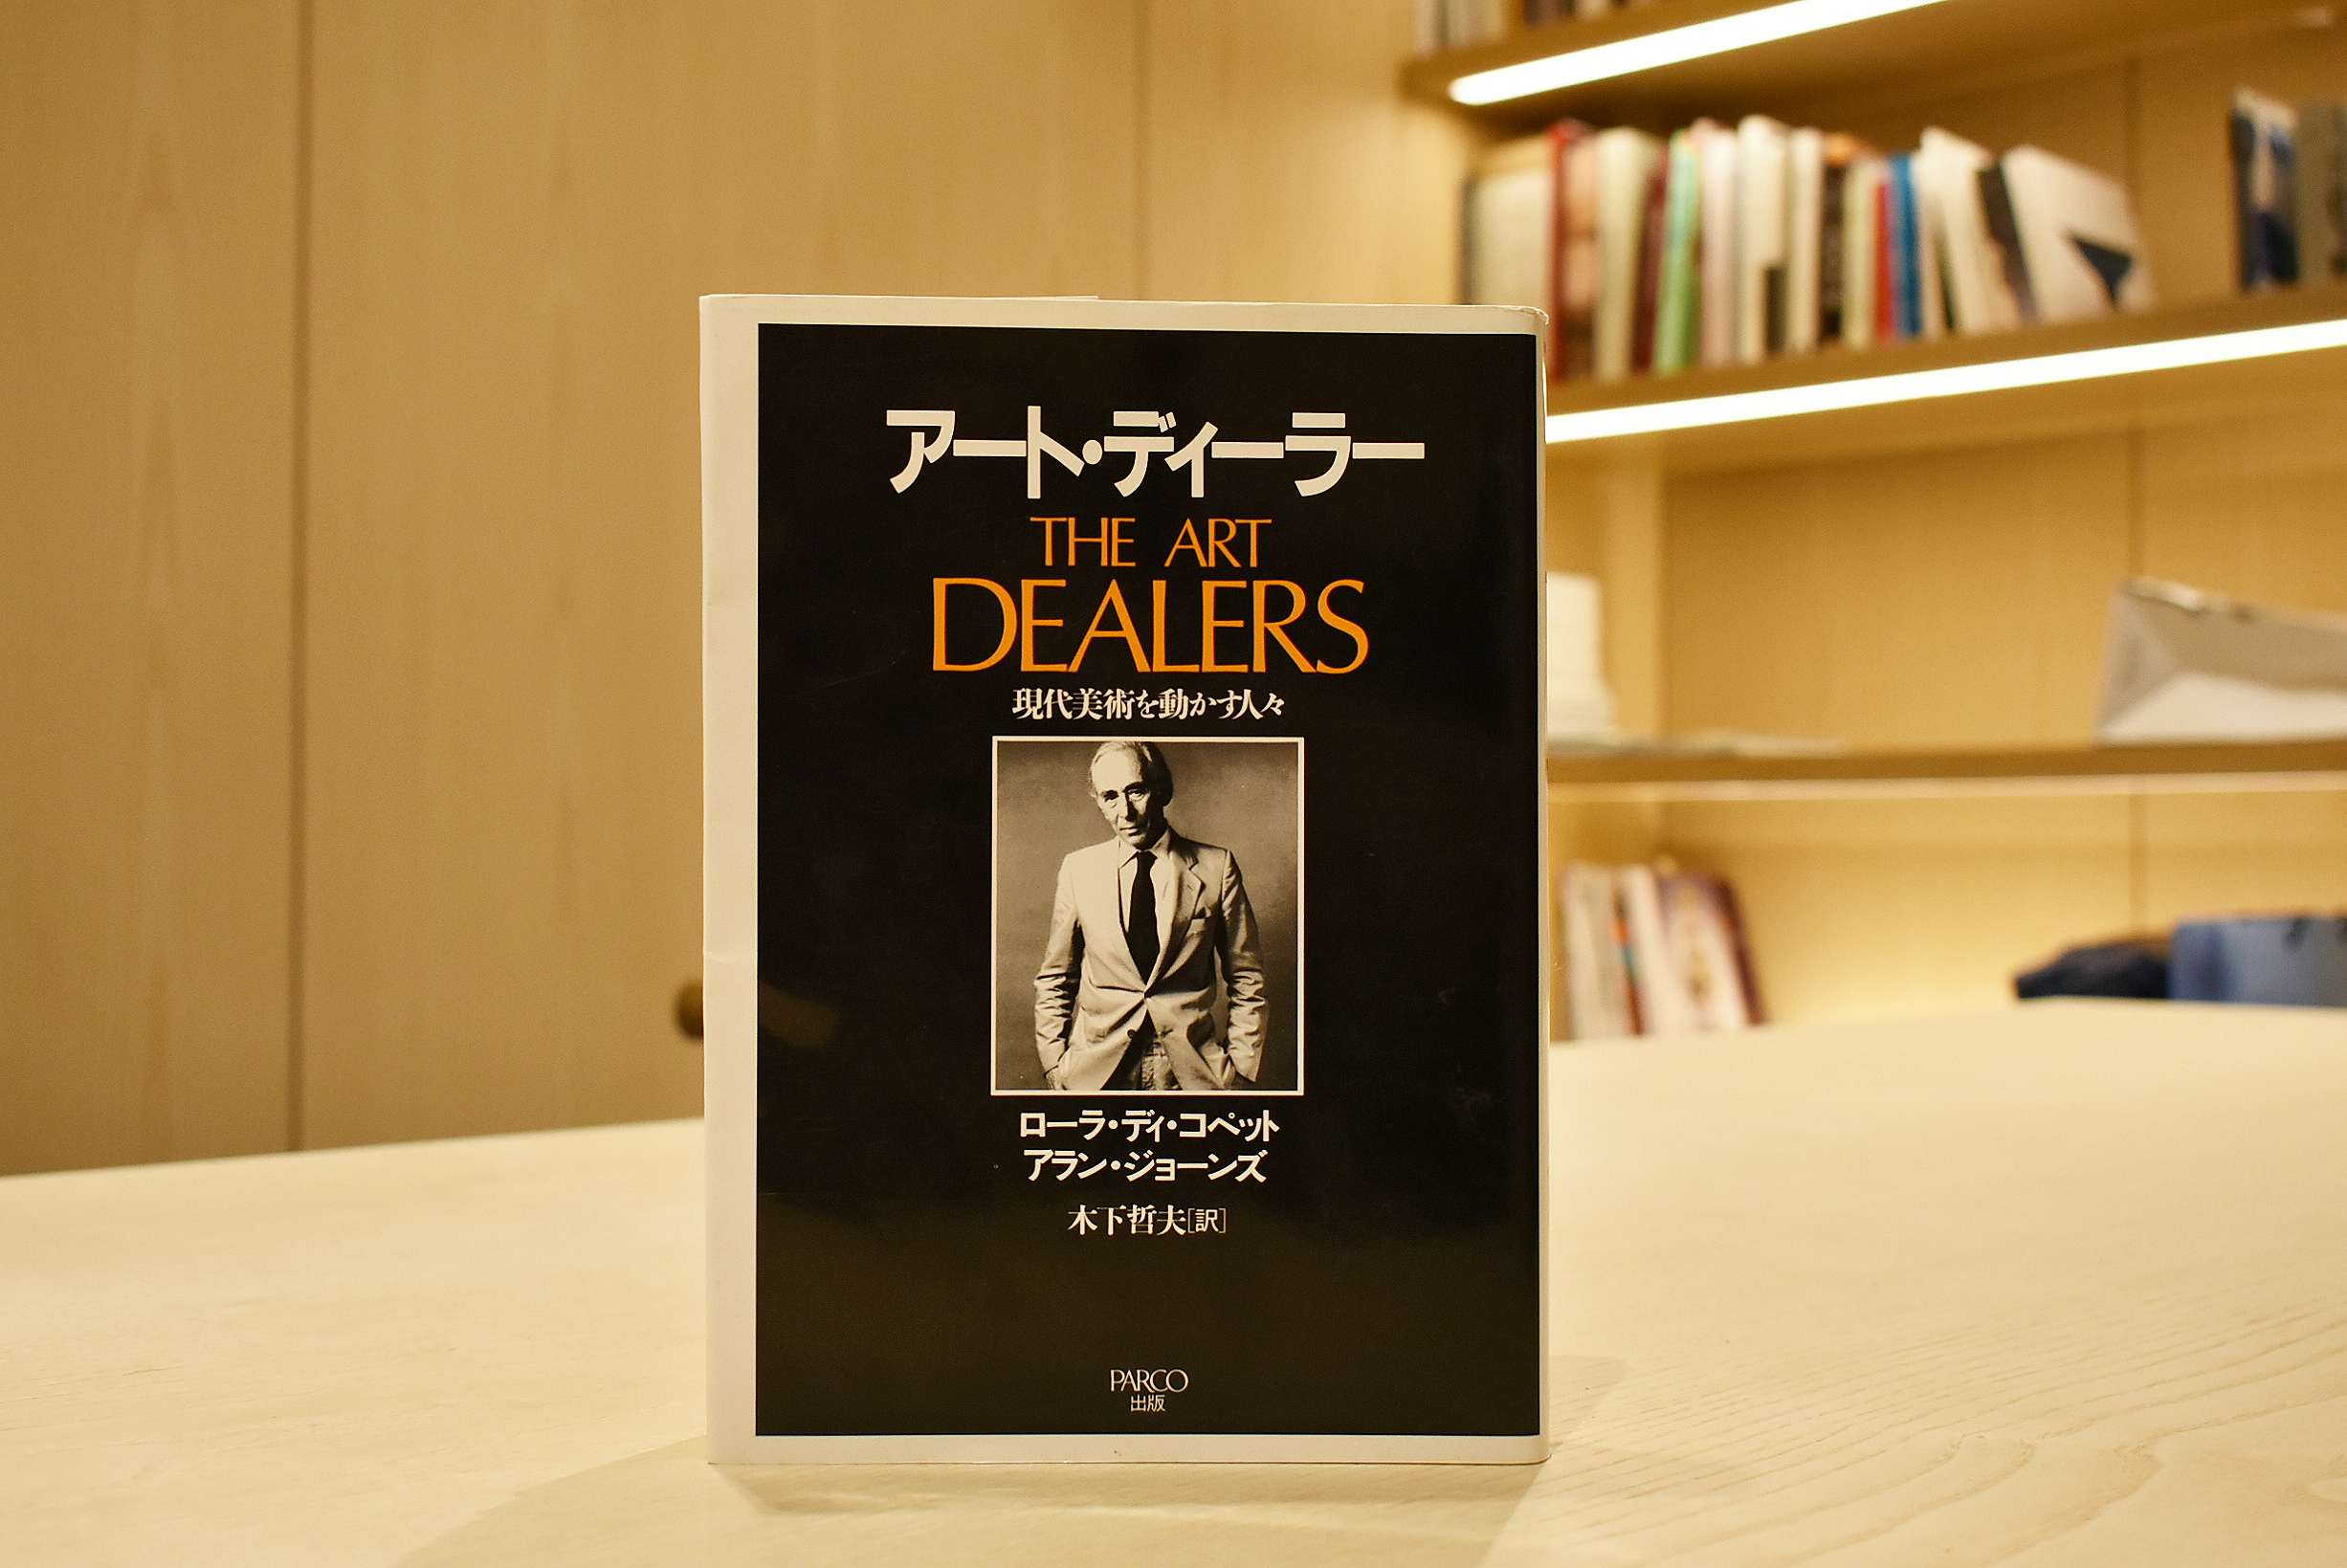 THE ART DEALERS アート・ディーラー 現代美術を動かす人々 - アート 